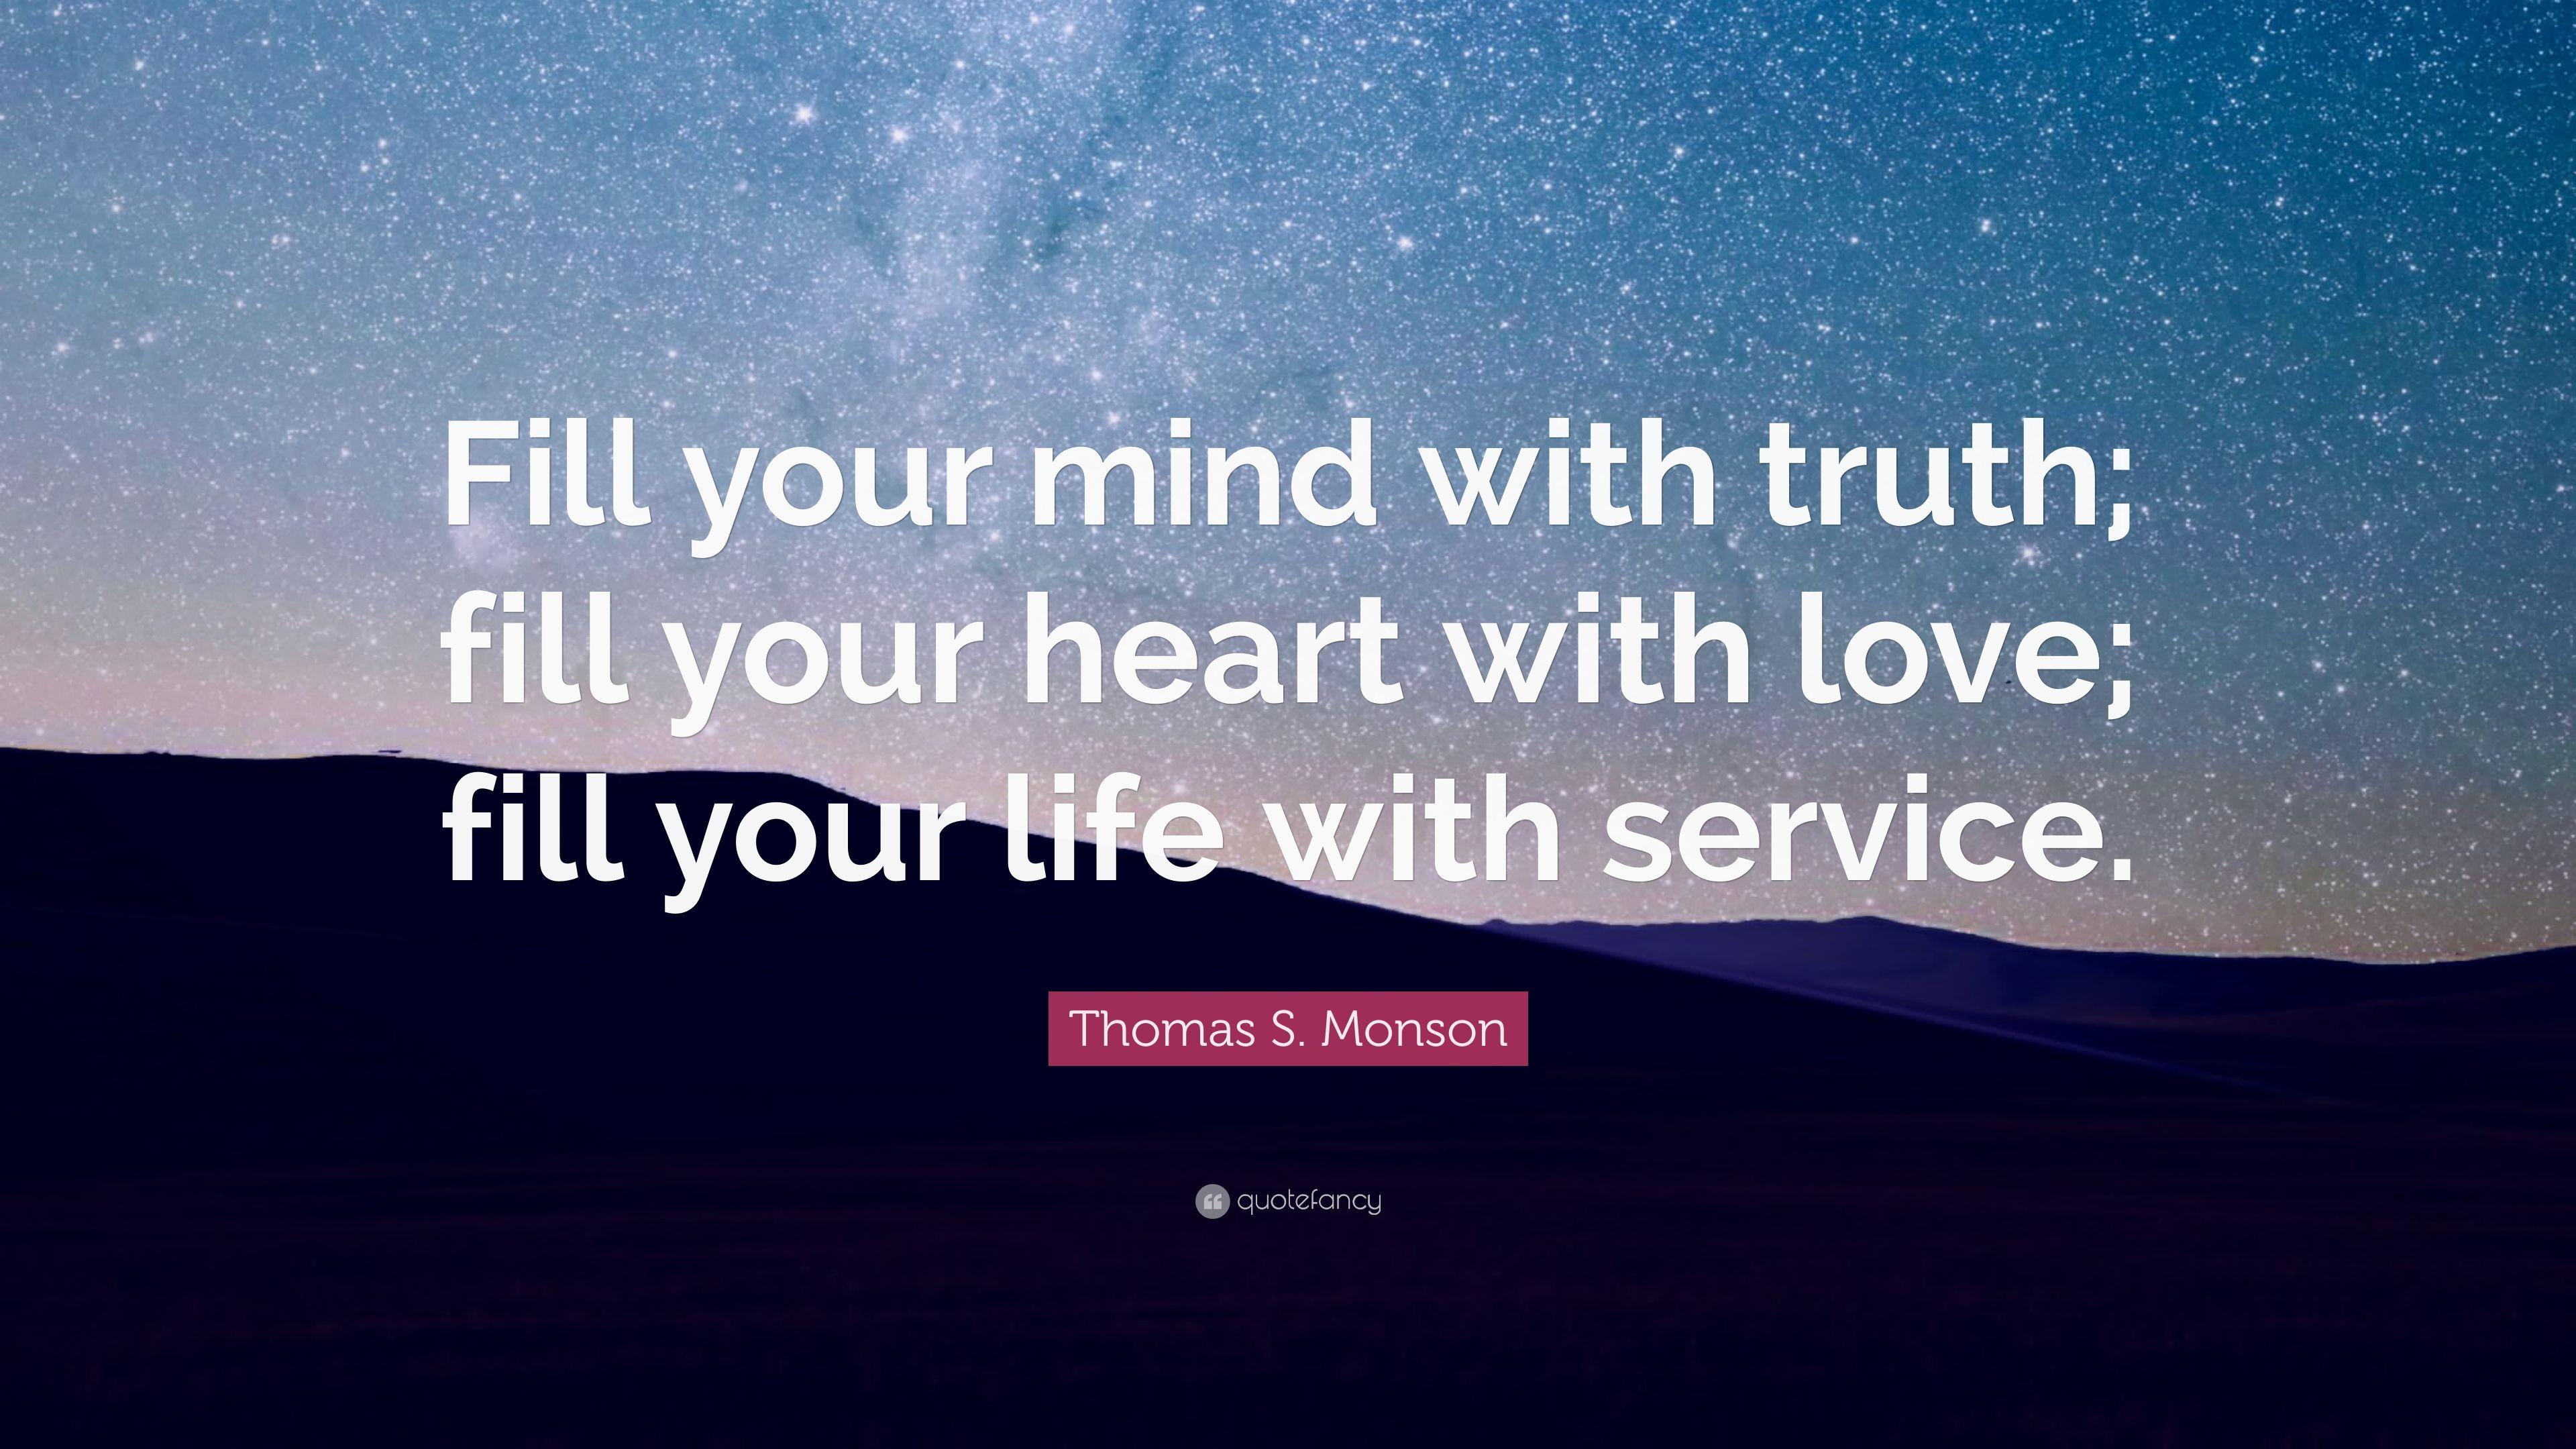 Thomas S. Monson Quote: “Fill your mind with truth; fill your